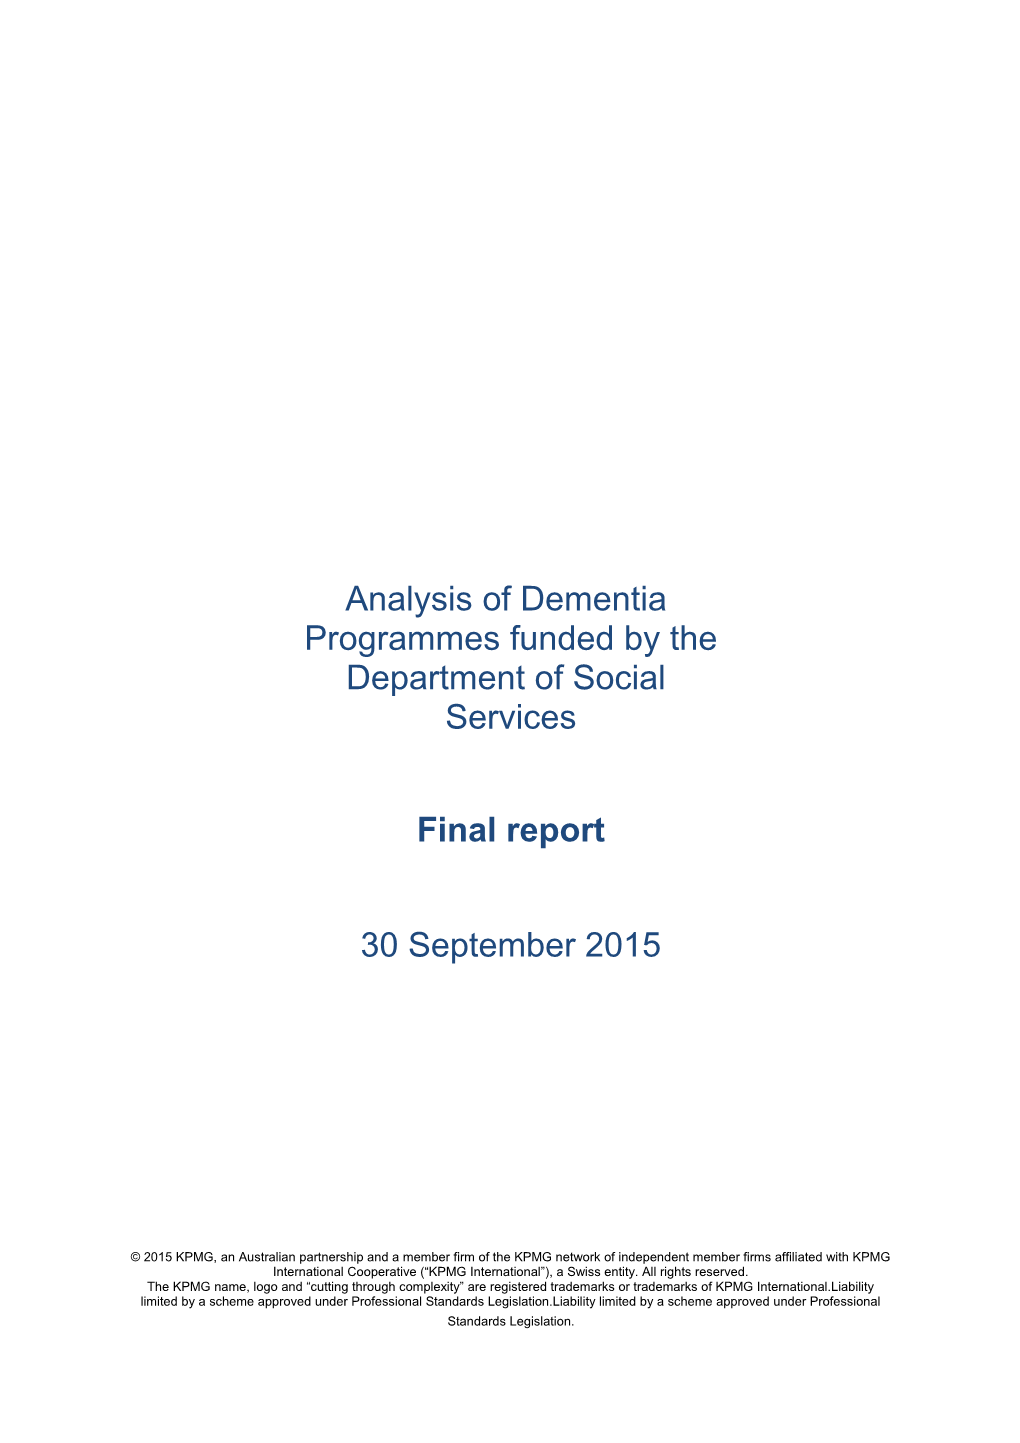 Review of Current Commonwealth Funded Dementia Programmes